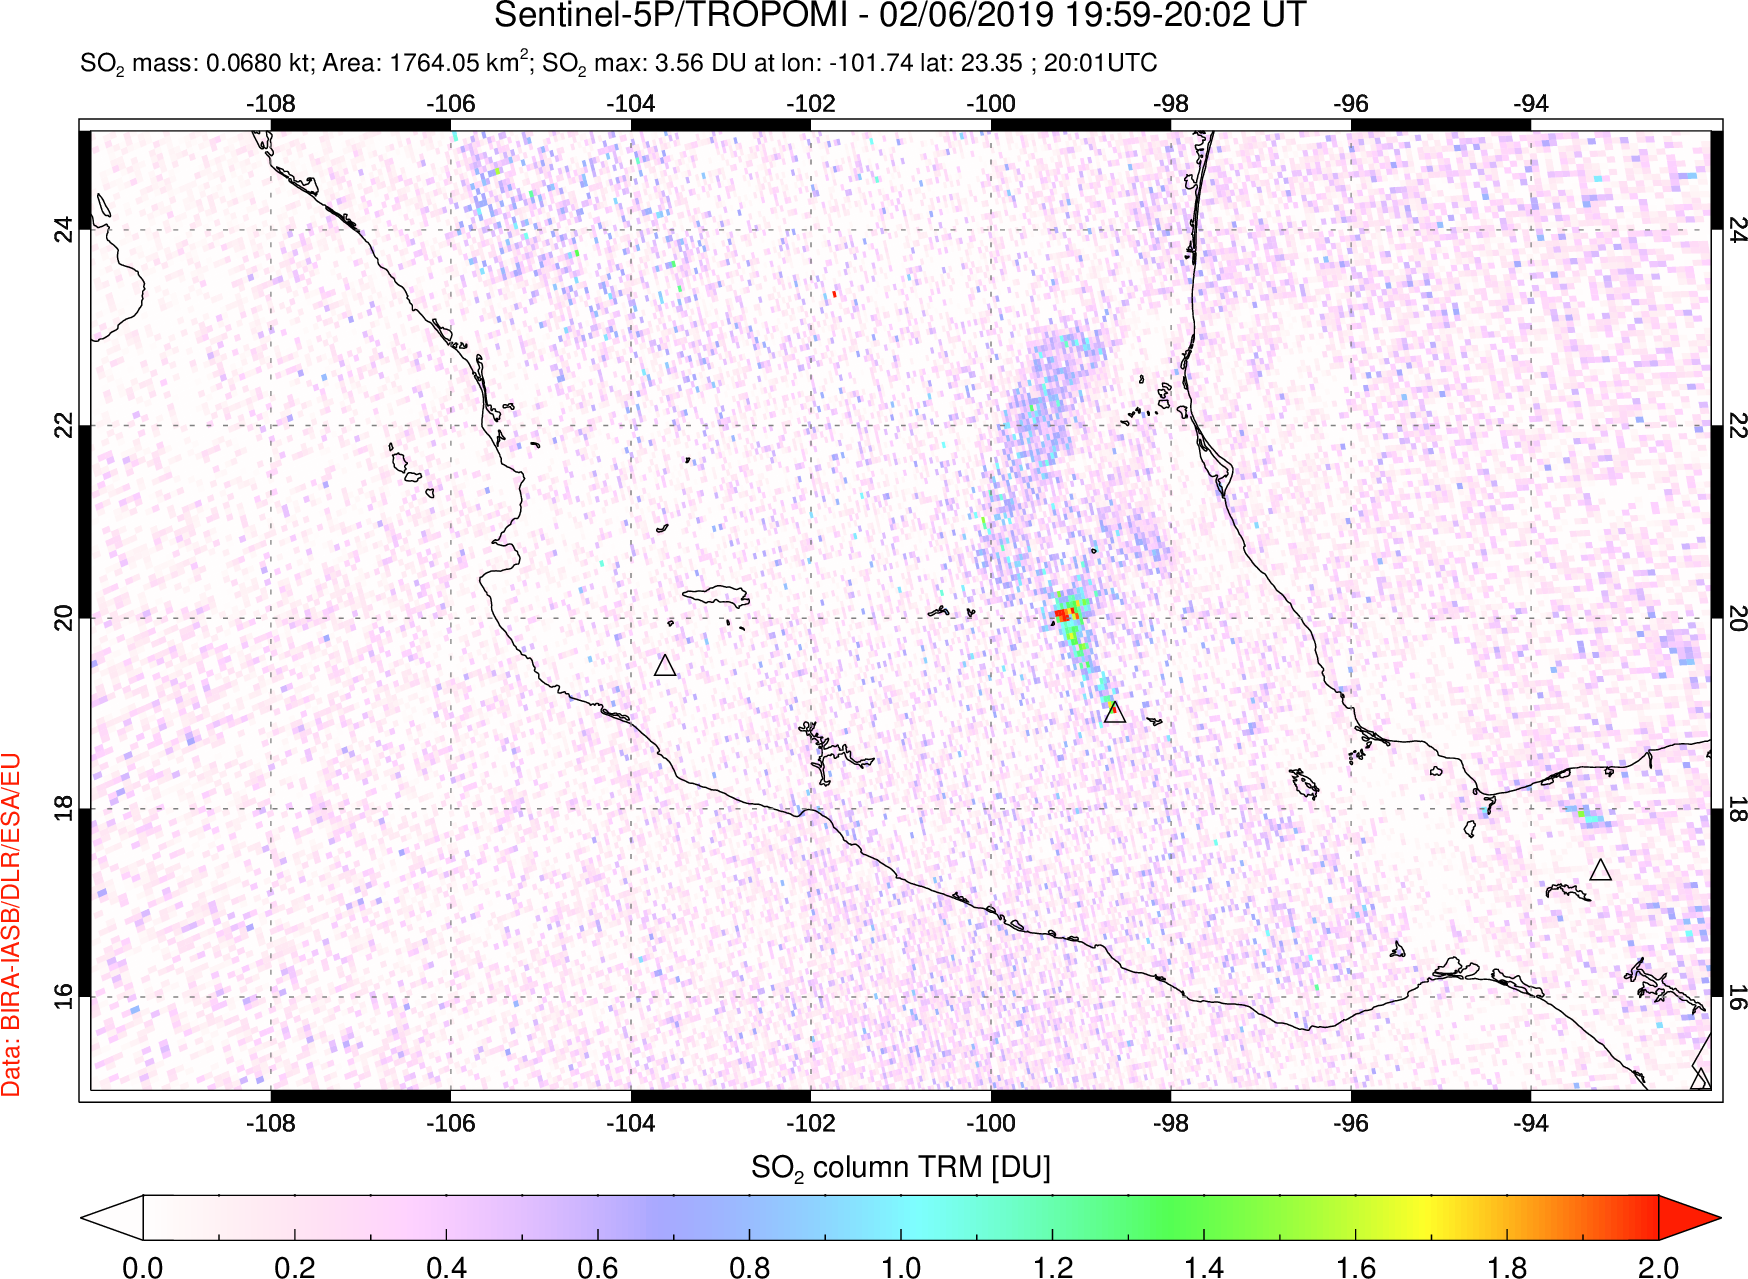 A sulfur dioxide image over Mexico on Feb 06, 2019.